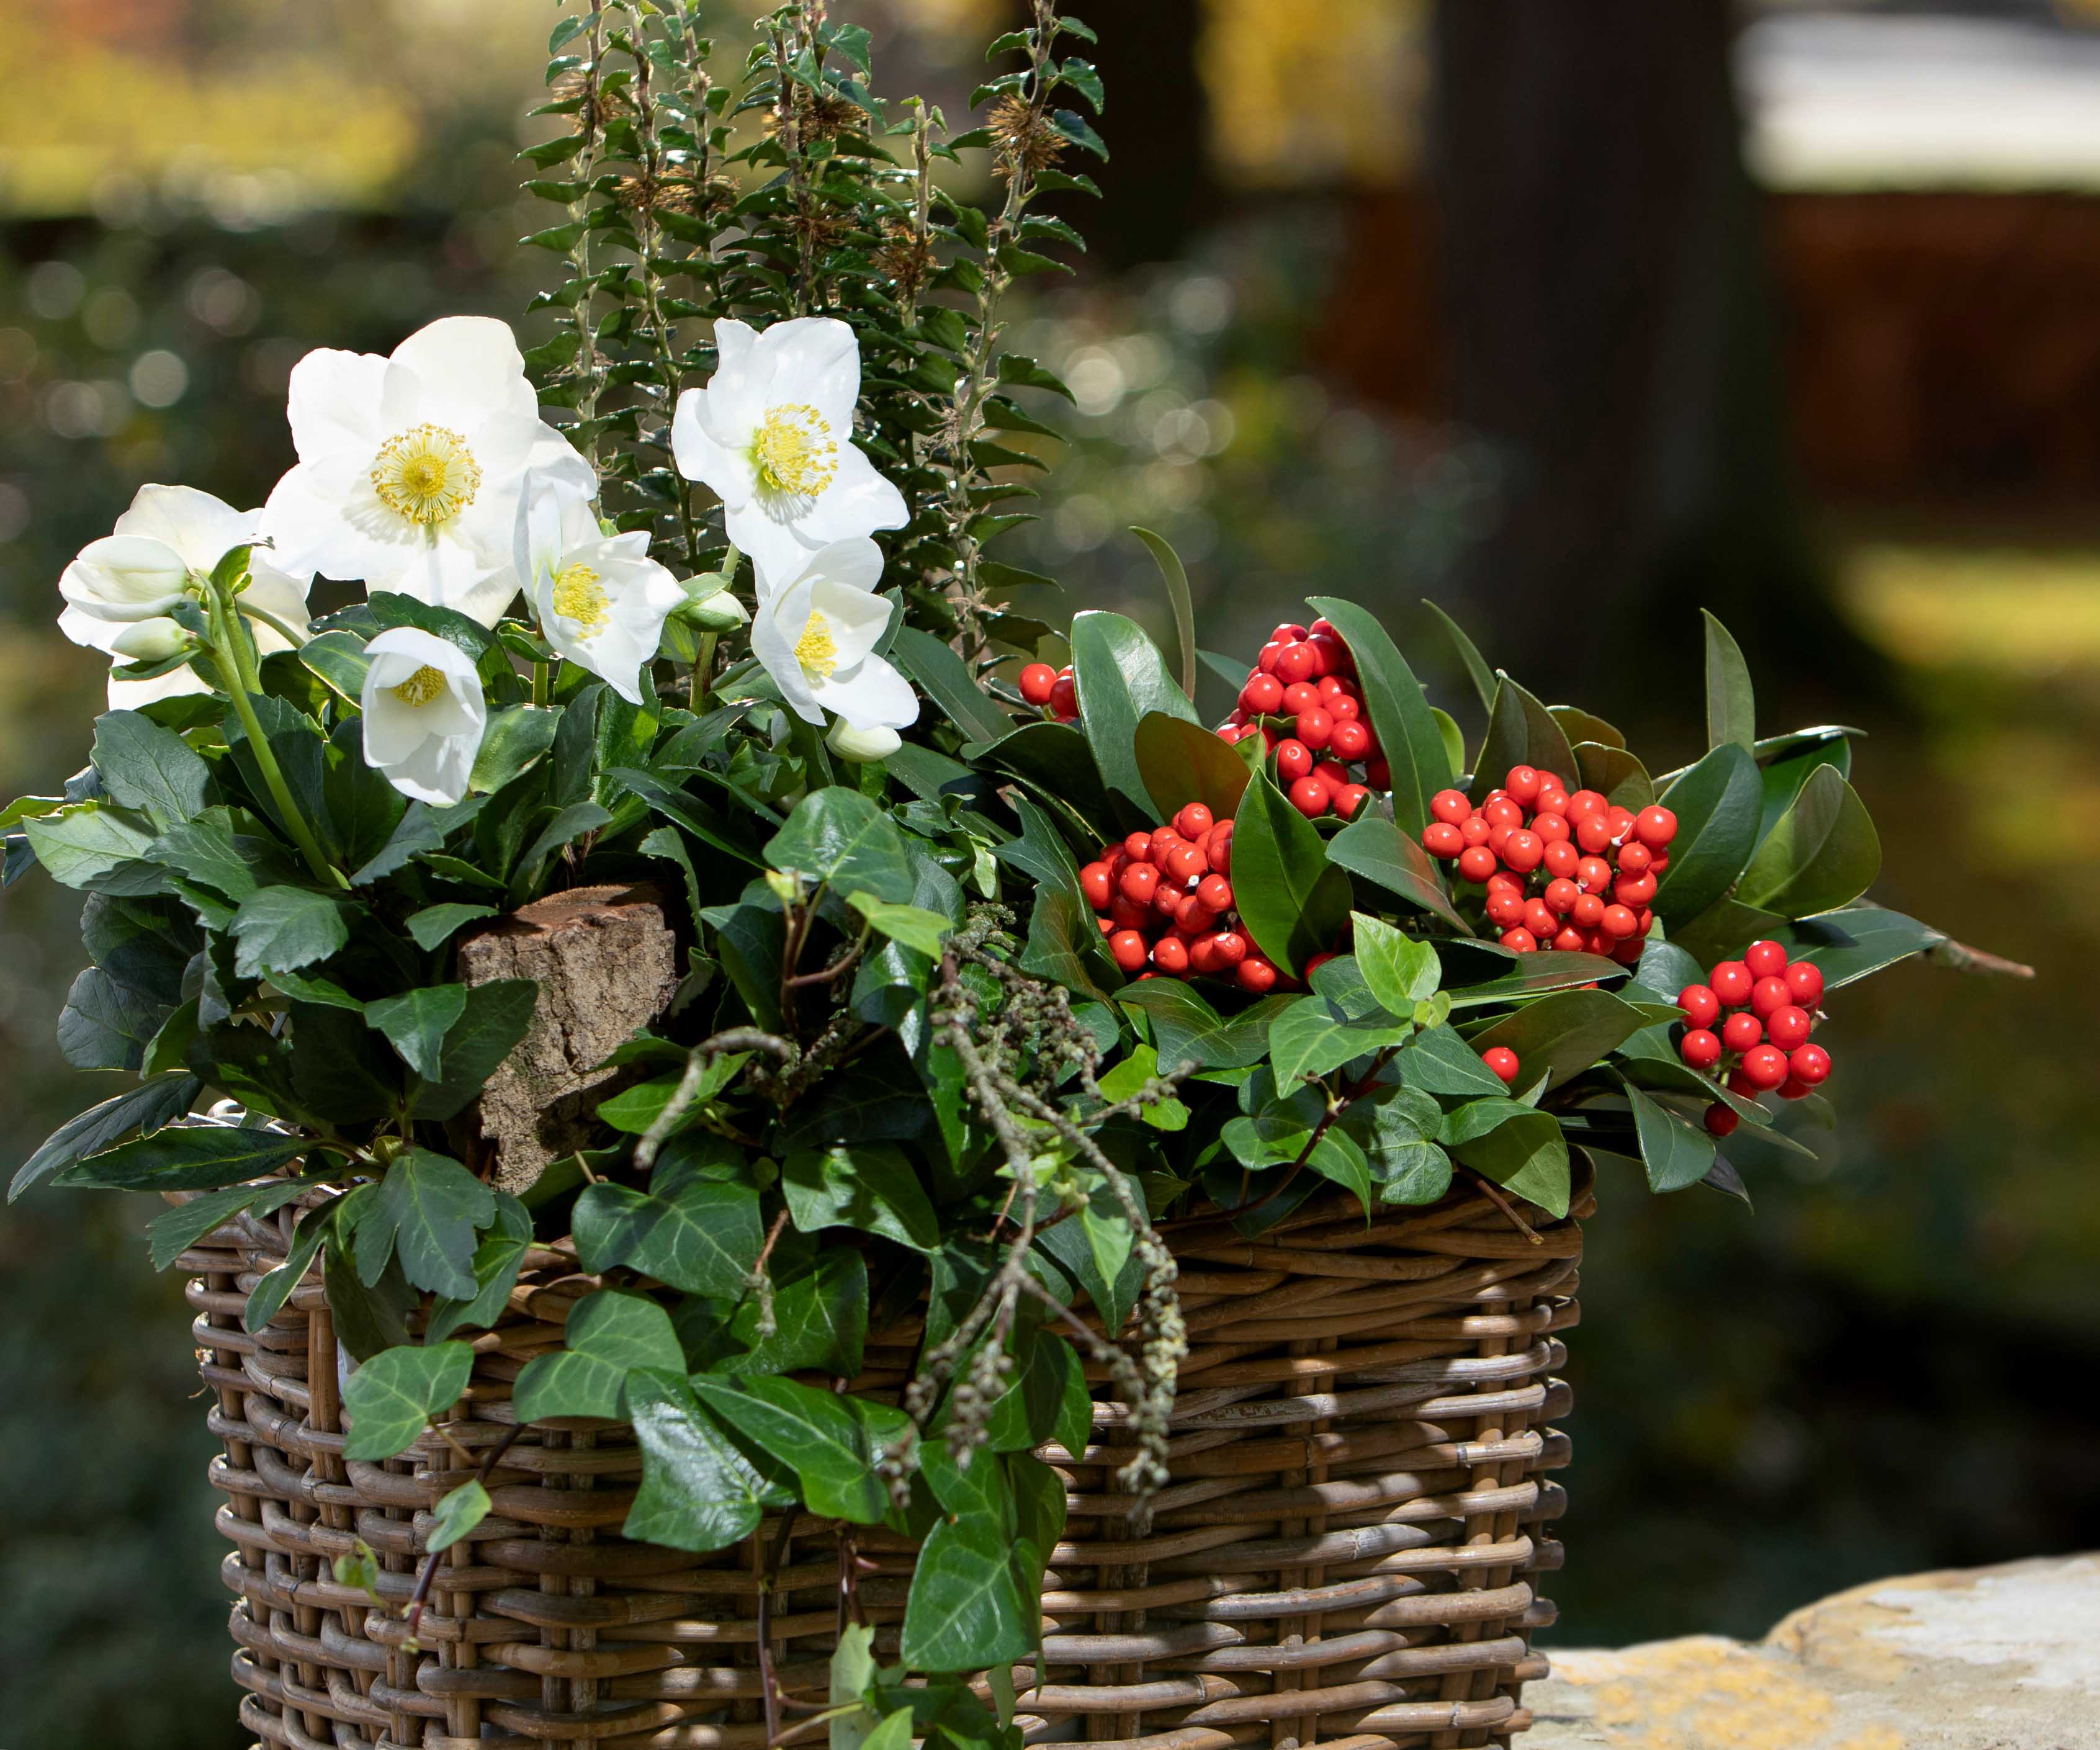 A basket filled with winter joy